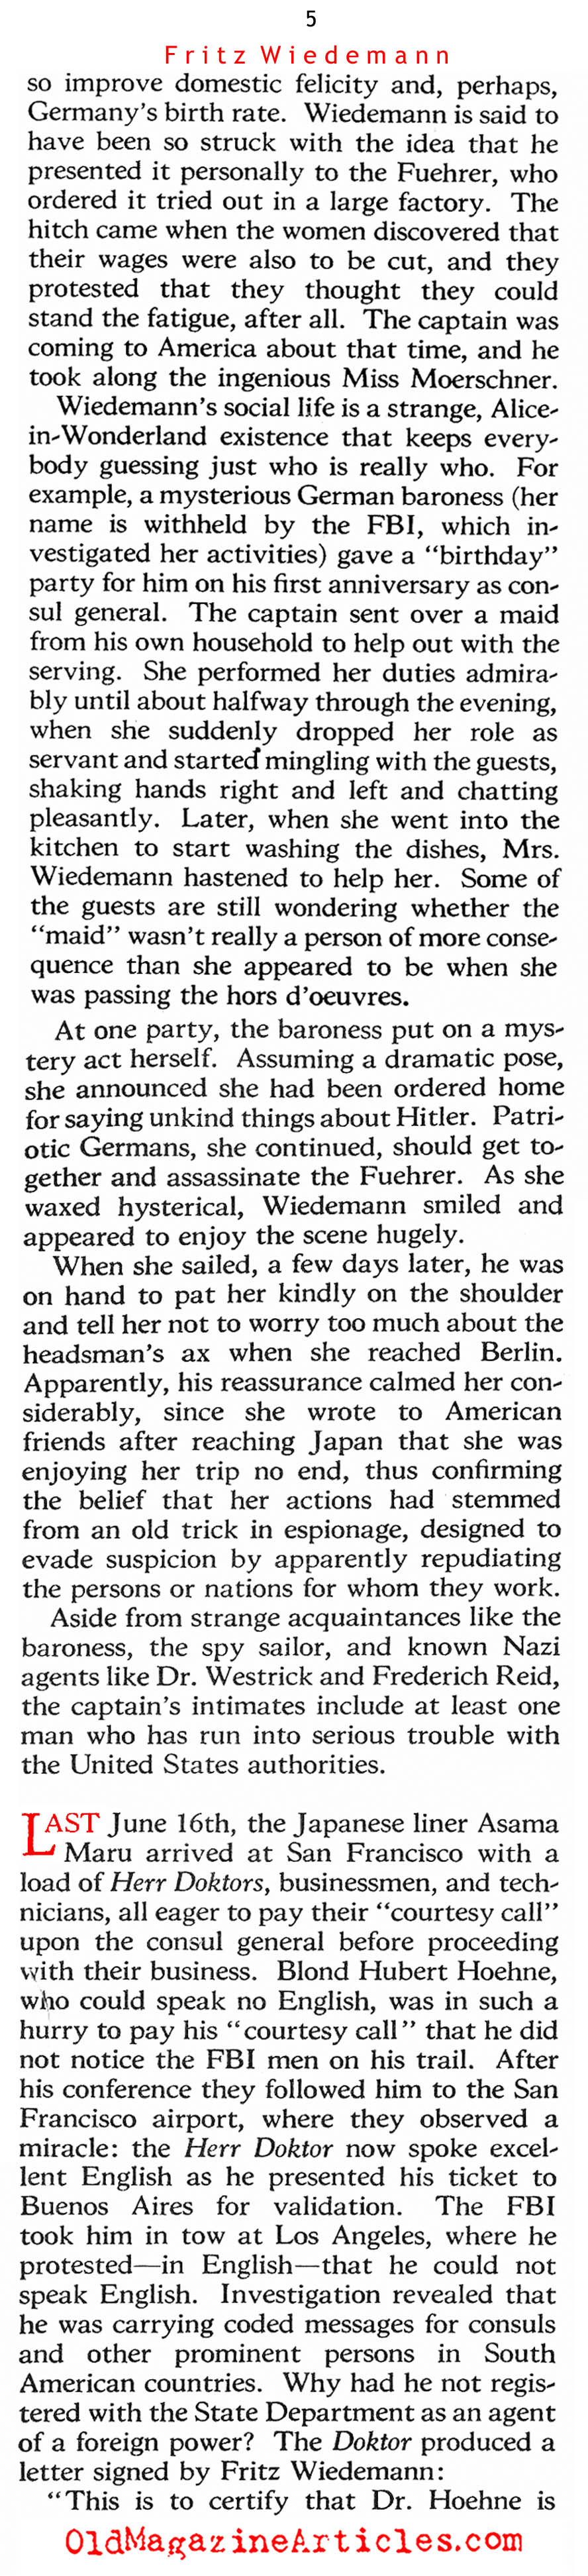 Friend of the Allies (The American Magazine, 1940)